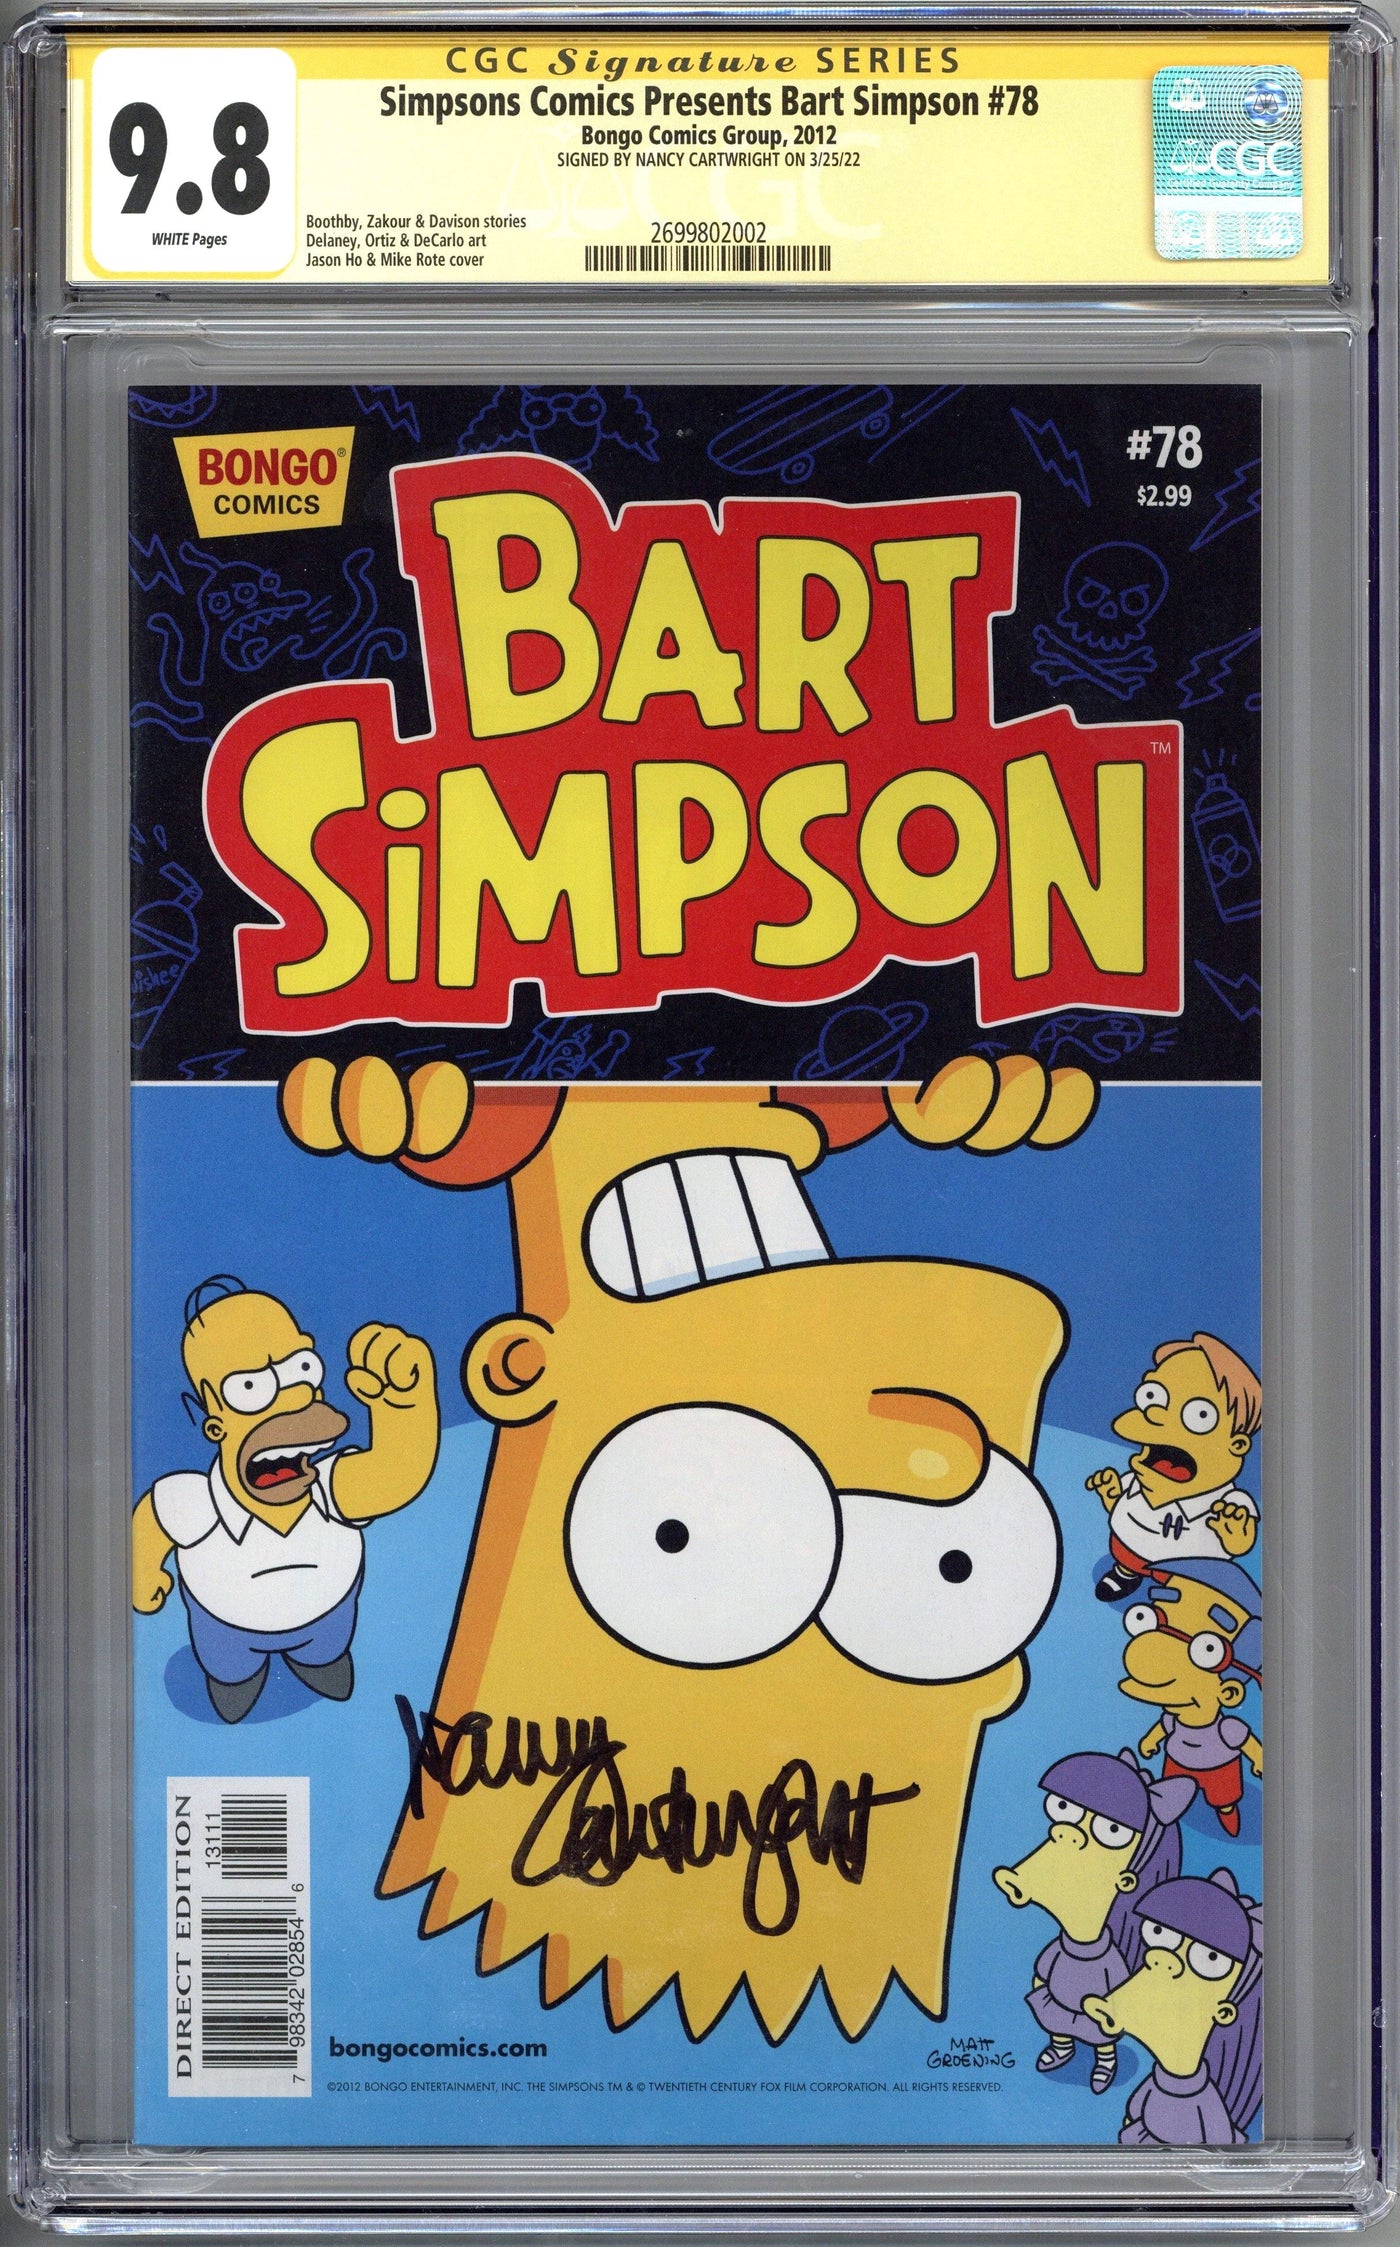 NANCY CARTWRIGHT SIGNED BART SIMPSON COMIC BOOK CGC 9.8 AUTOGRAPHED NC8